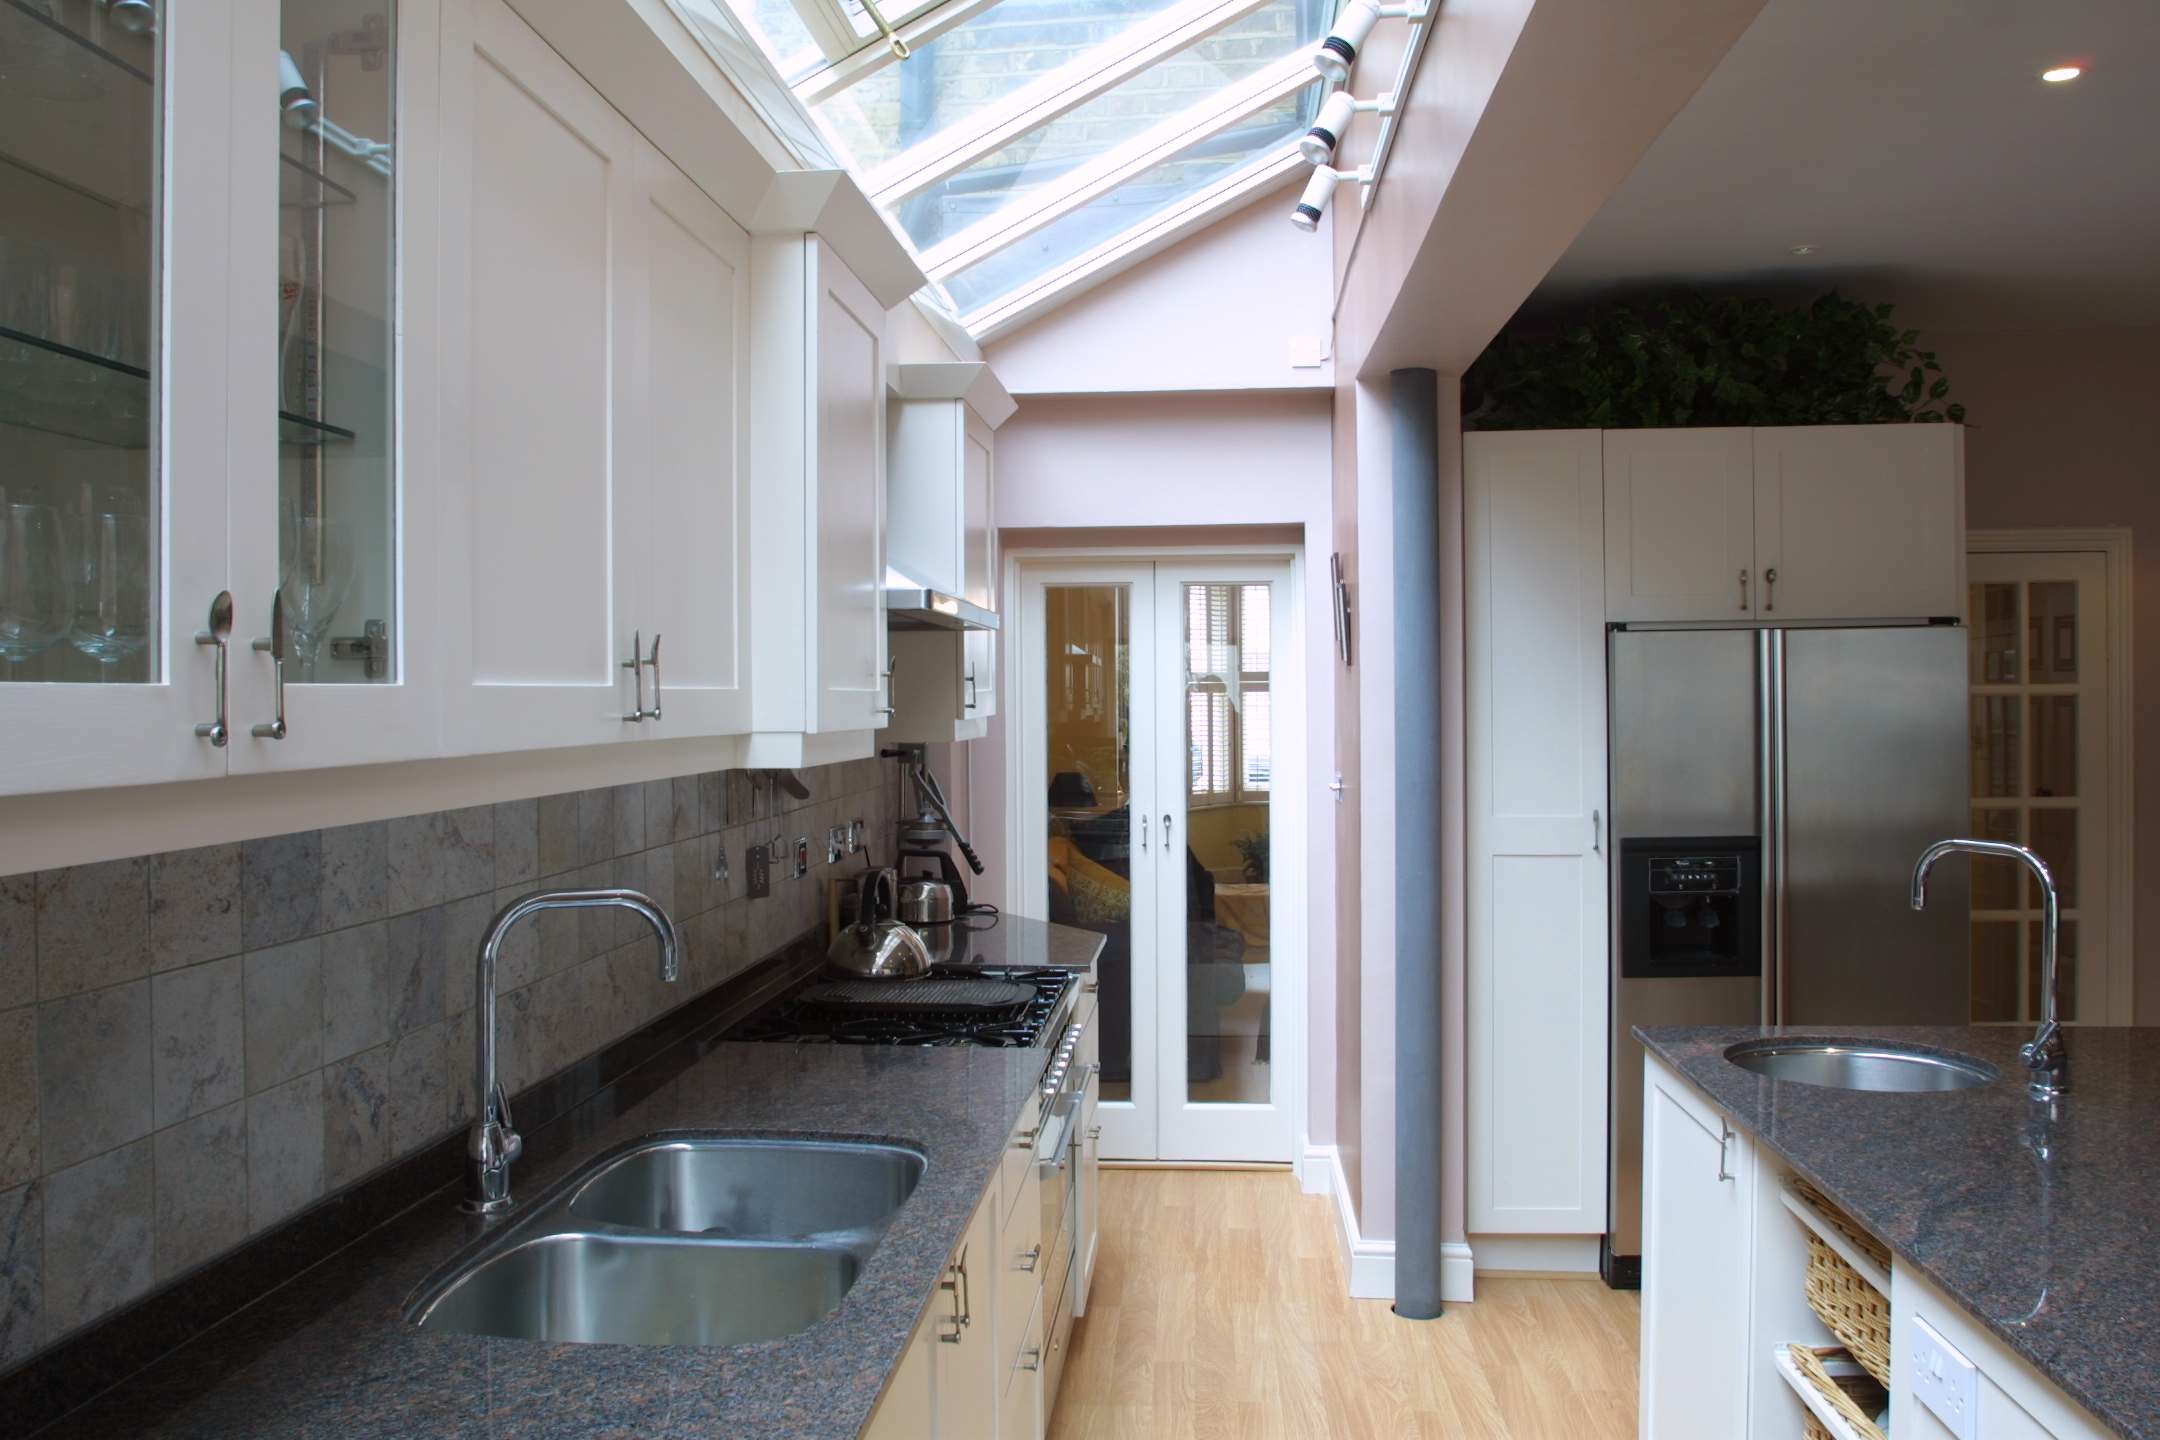 Home refurbishment and extension, West London